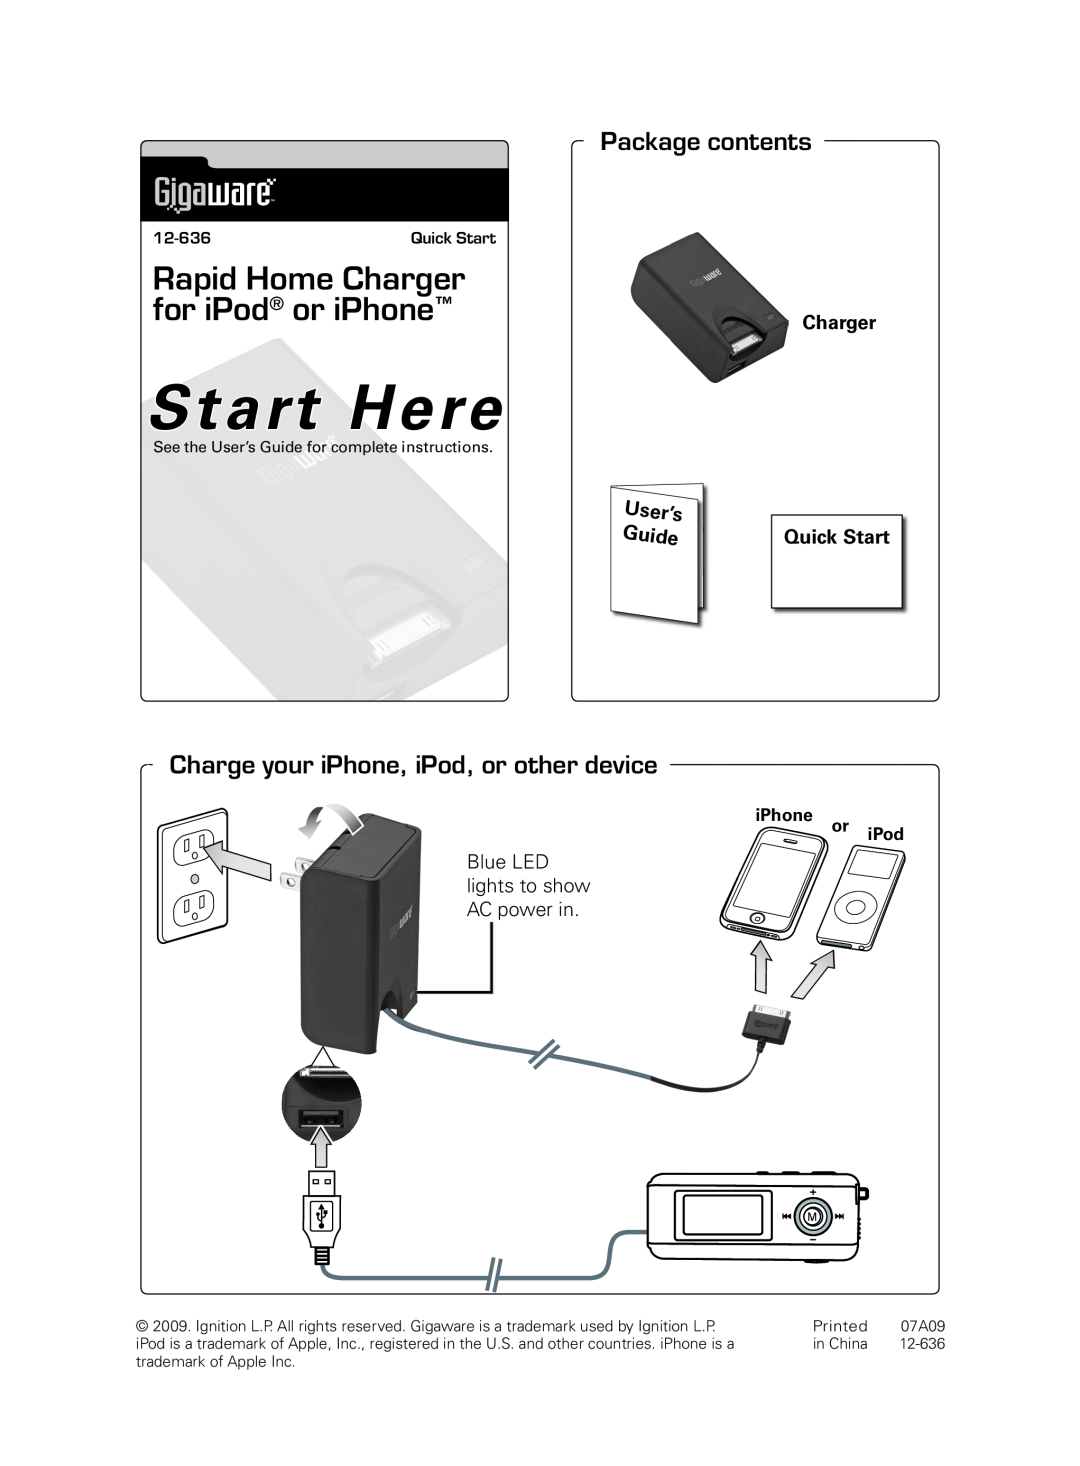 Radio Shack 12-636 quick start Start Here, Rapid Home Charger for iPod or iPhone, Package contents, User’s, Guide 